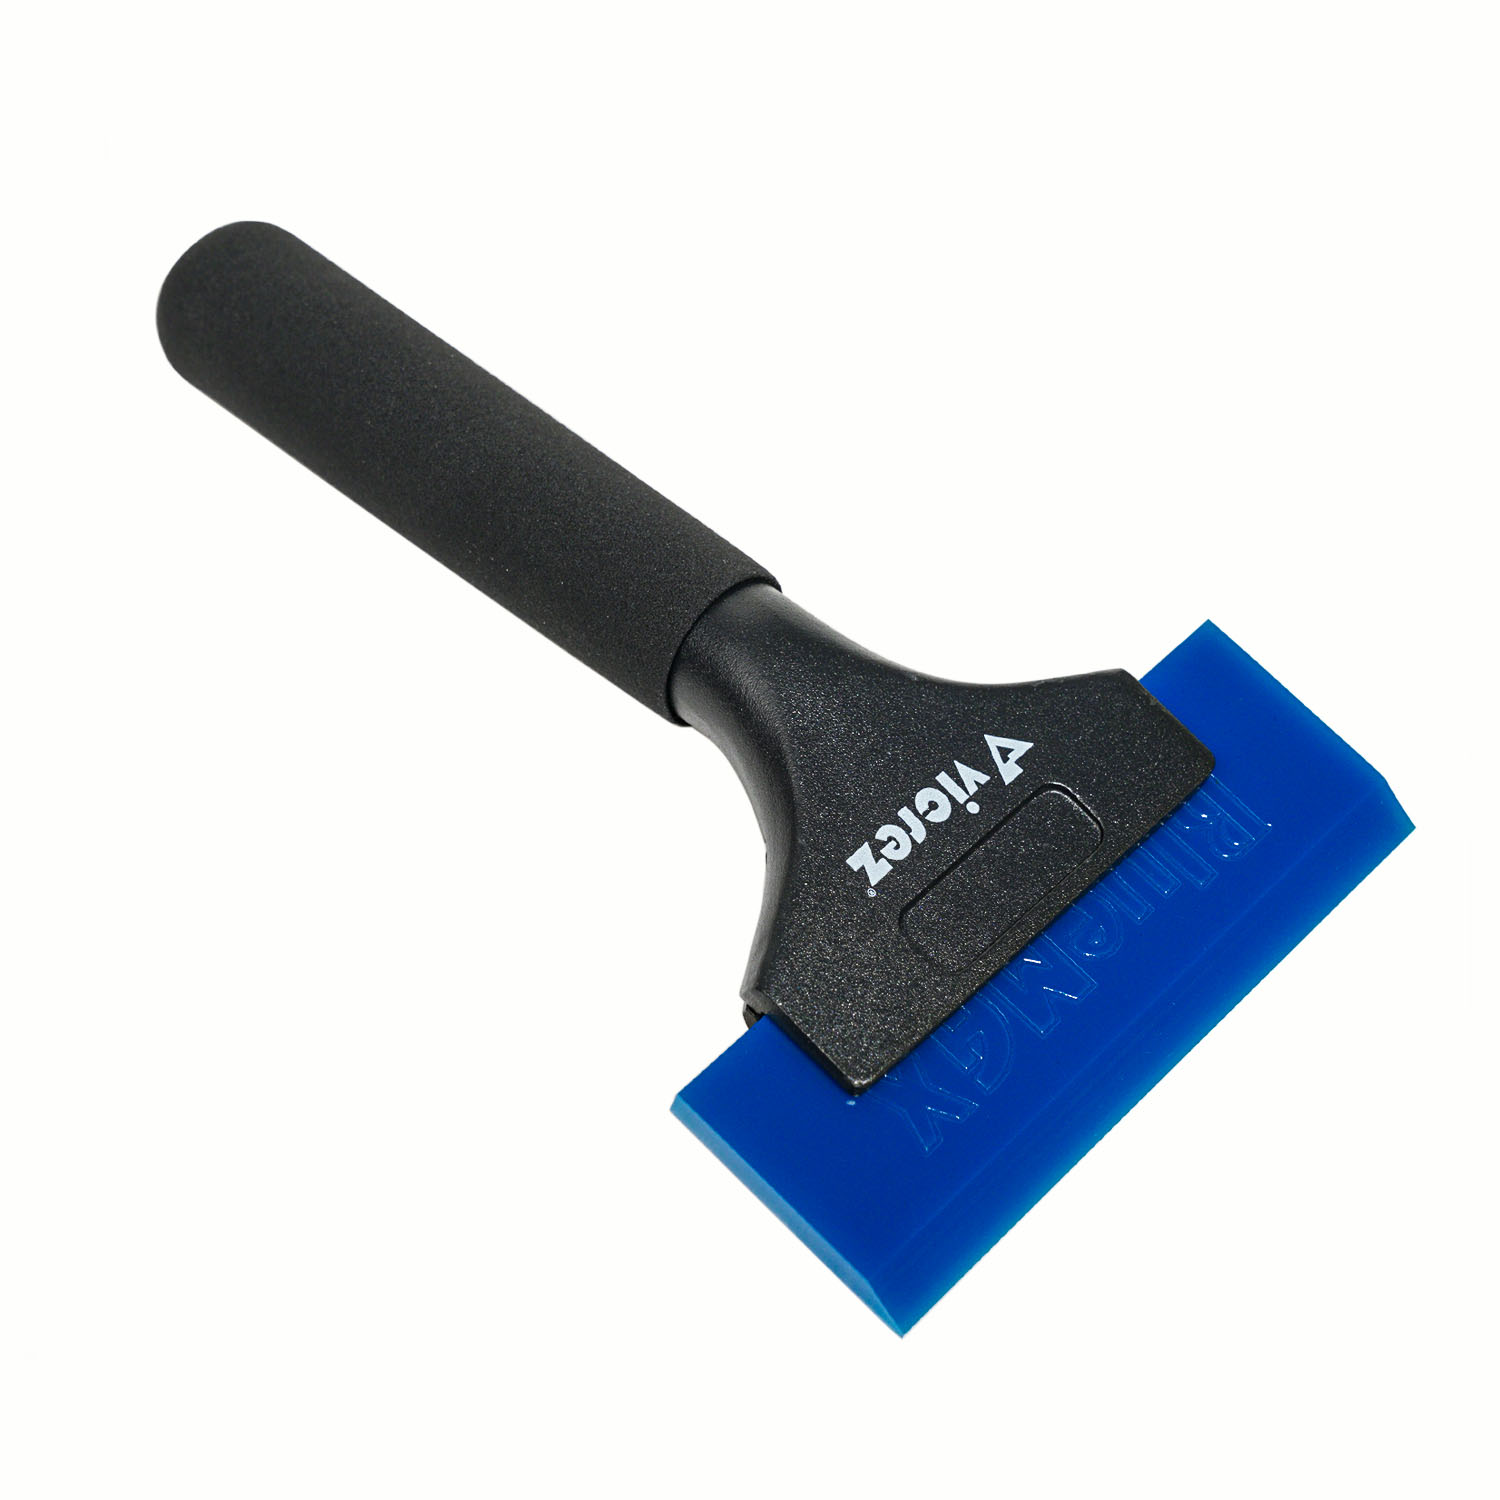 SOTT The Hustler Vinyl Wrapping Squeegee